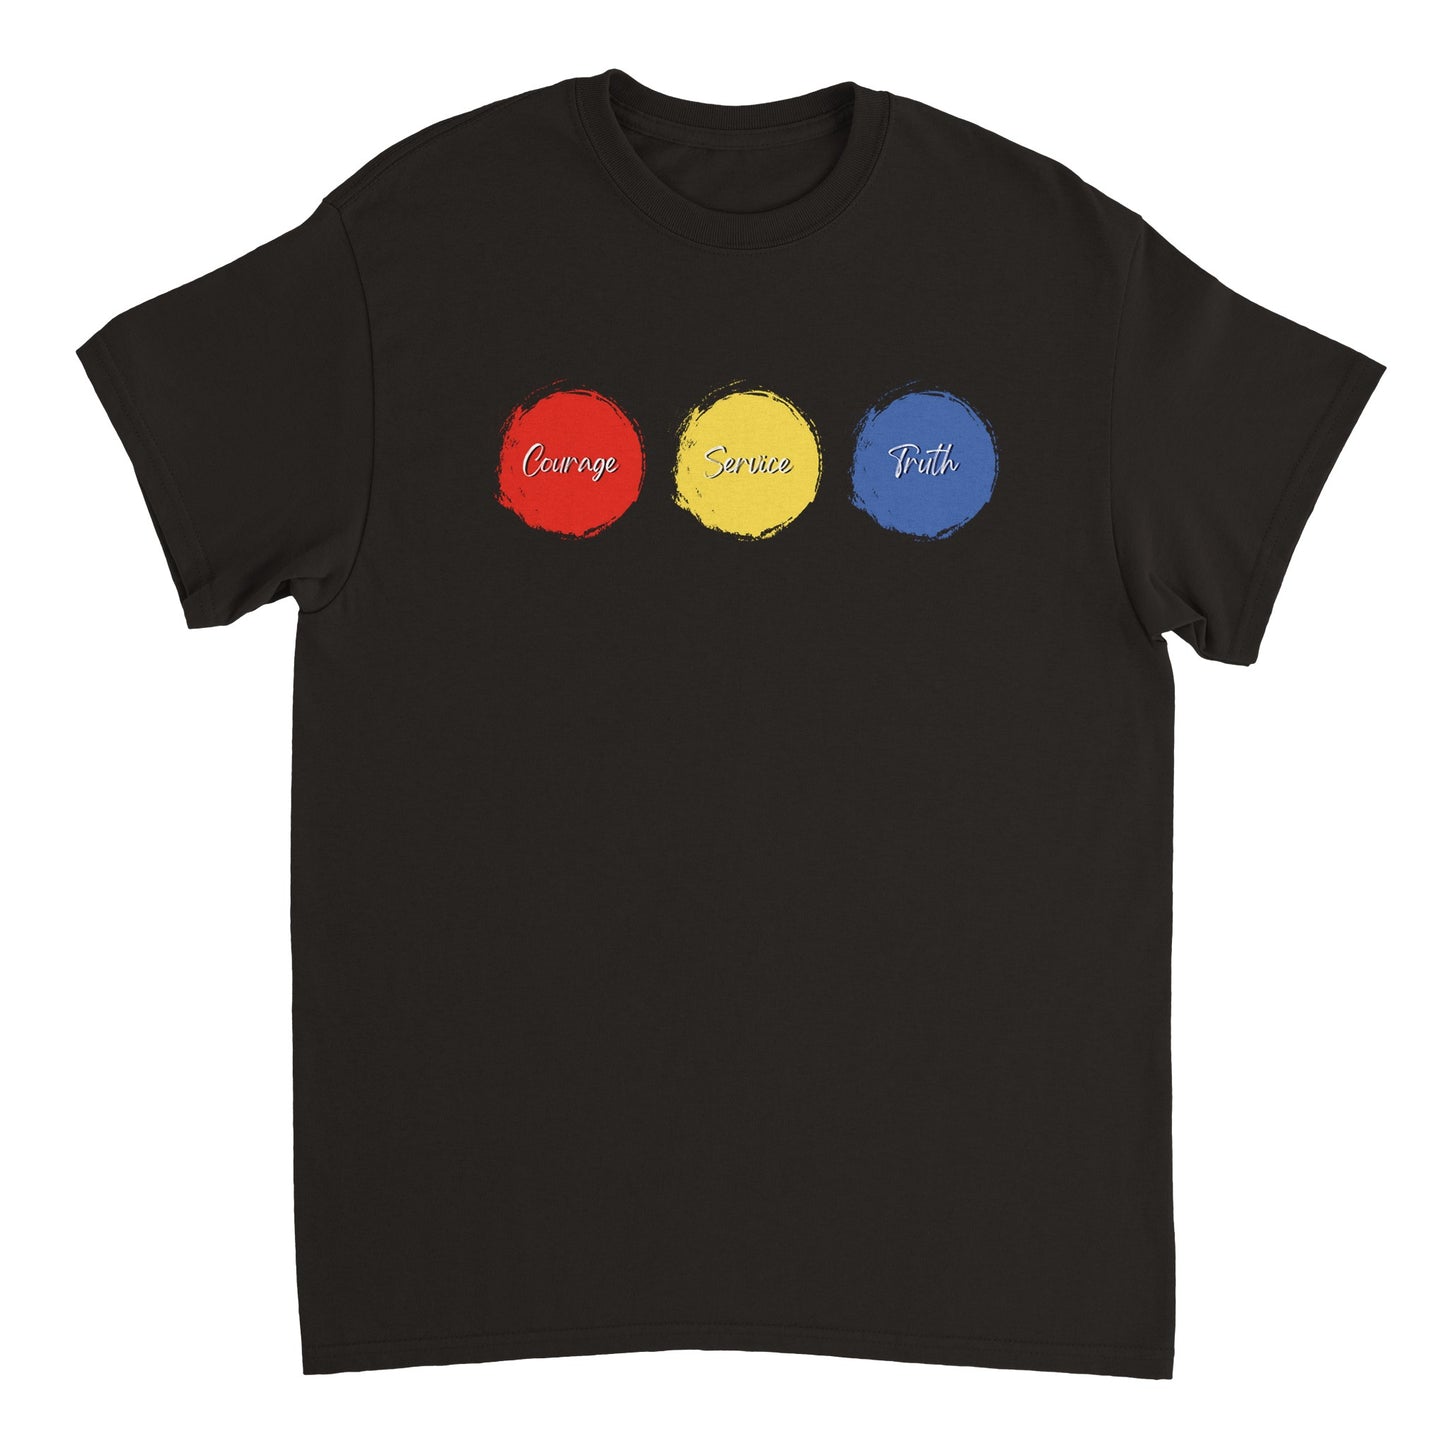 Primary Colors Tee